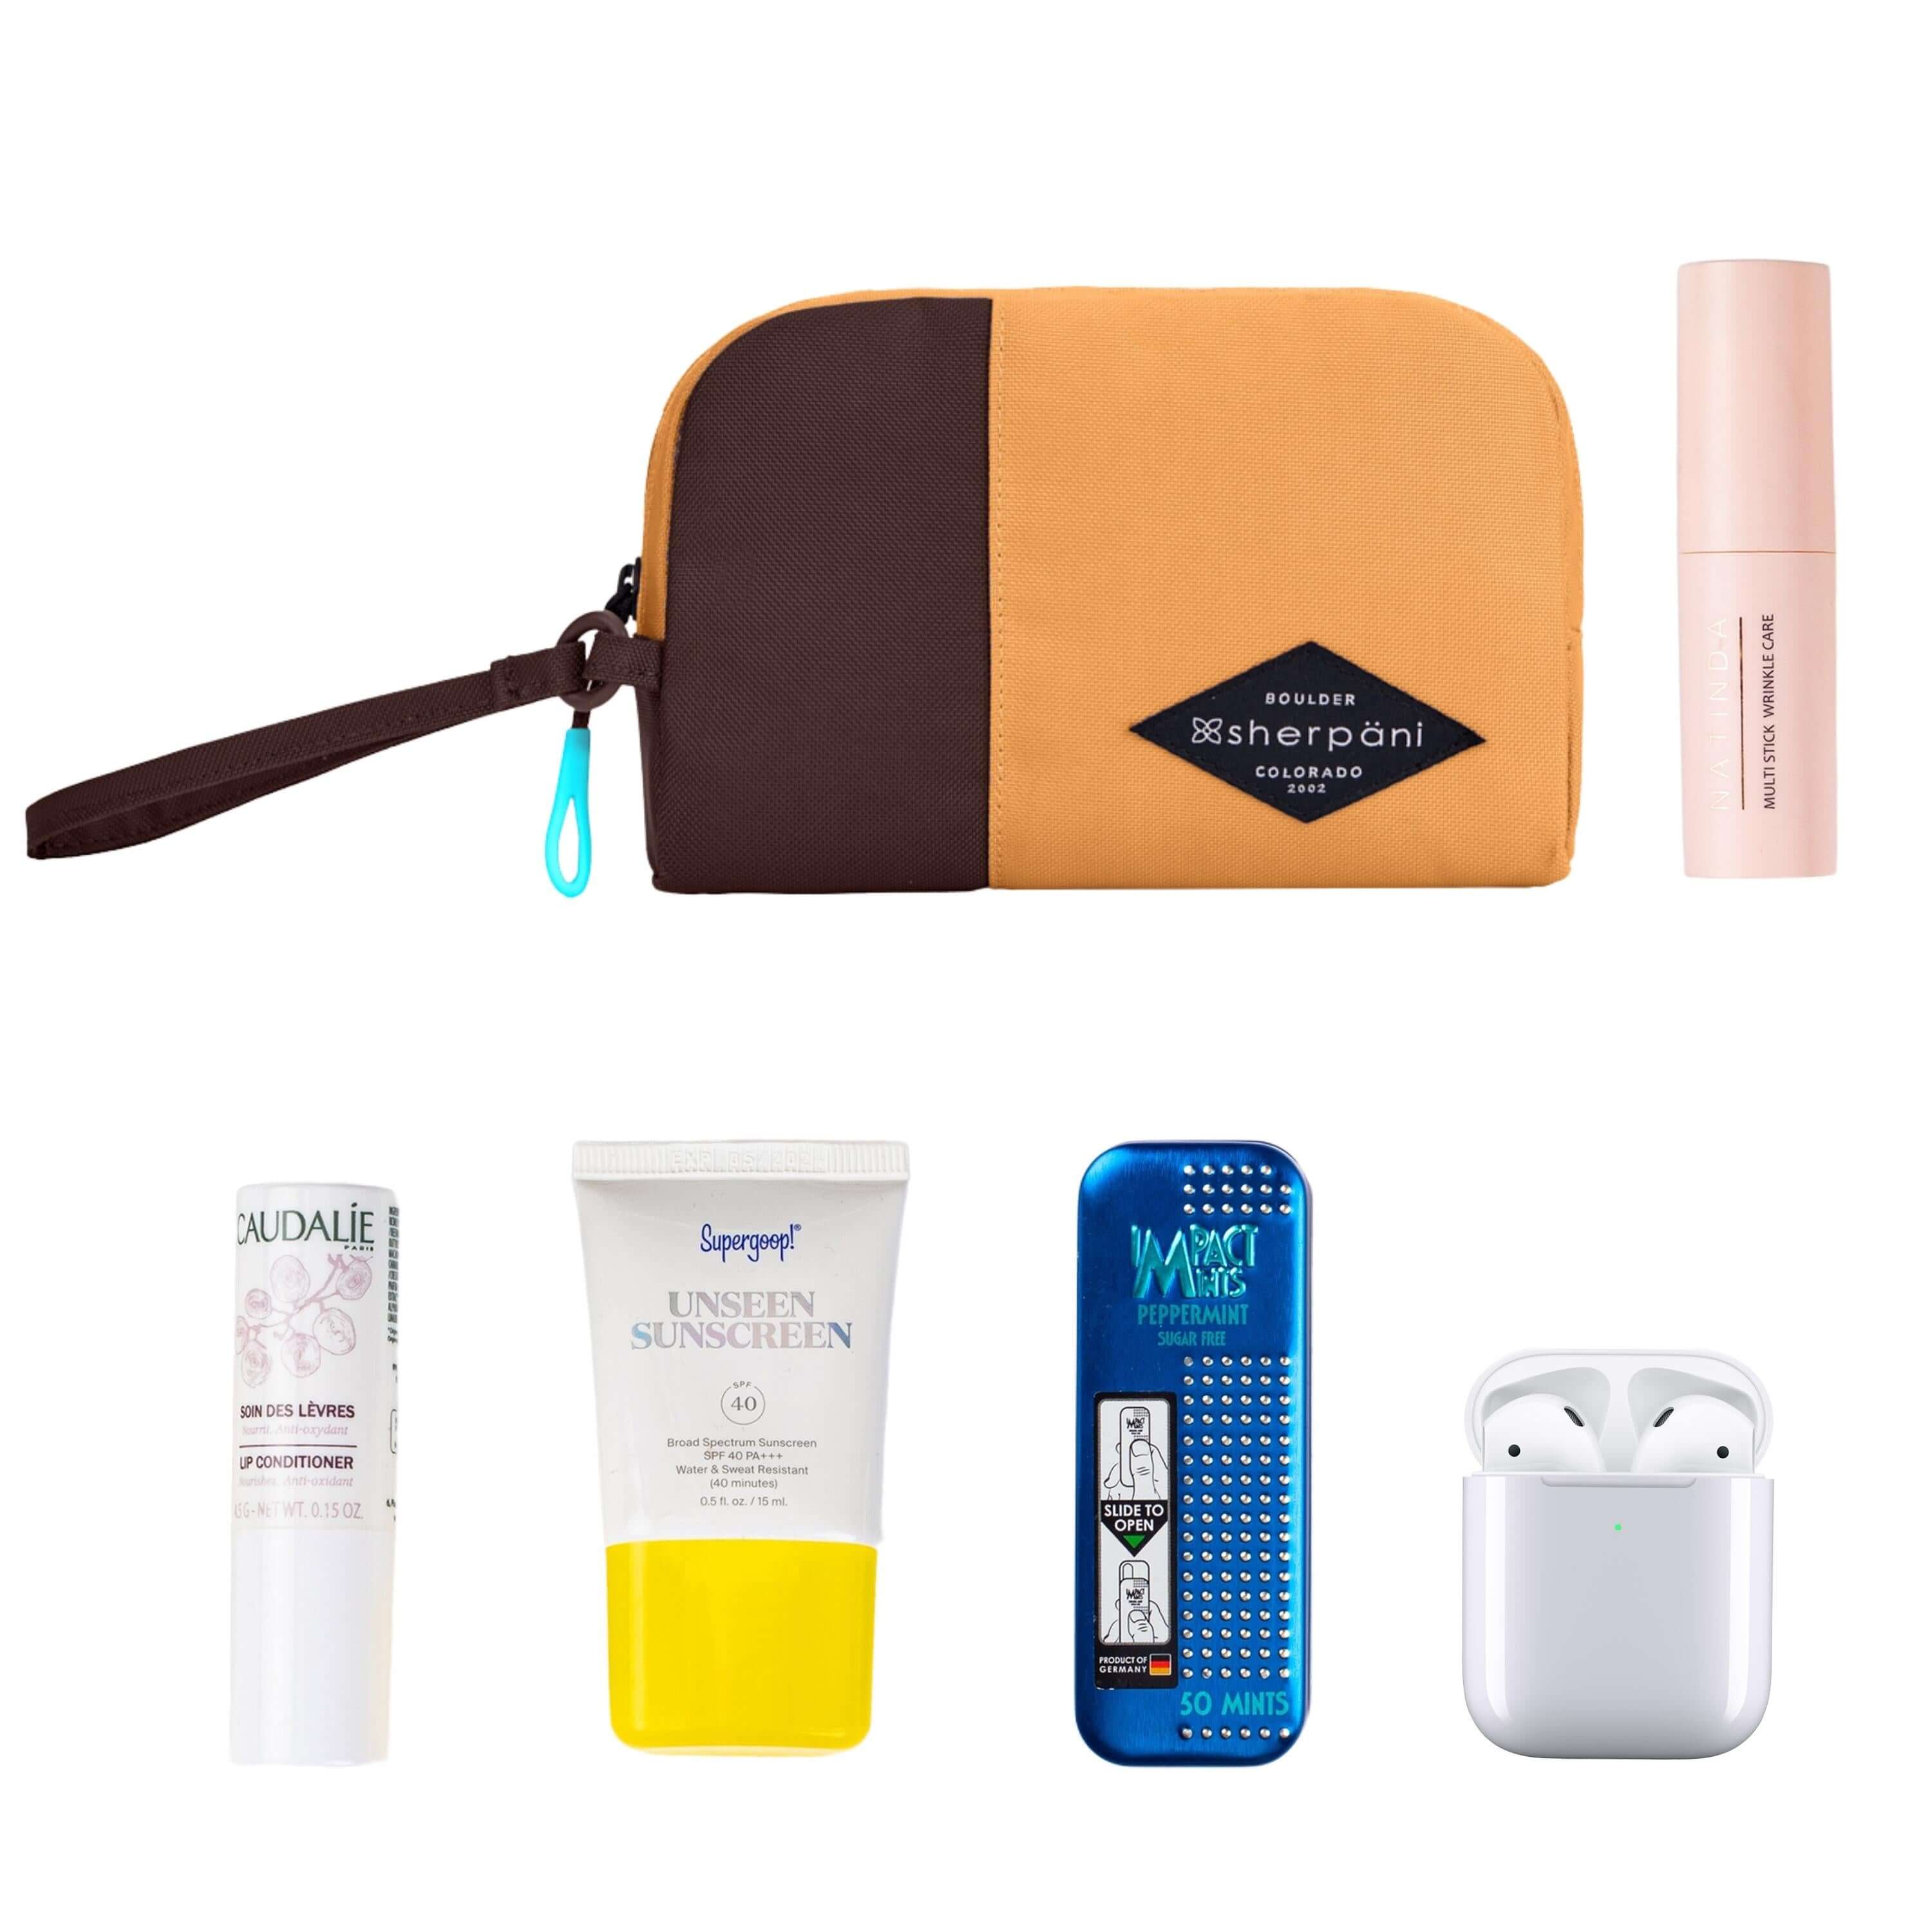 Top view of example items to fill the bag. Sherpani travel accessory, the Jolie in Sundial in small size, lies in the upper left corner. It is surrounded by an assortment of items: beauty product, skincare product, sunscreen, mints and AirPods.